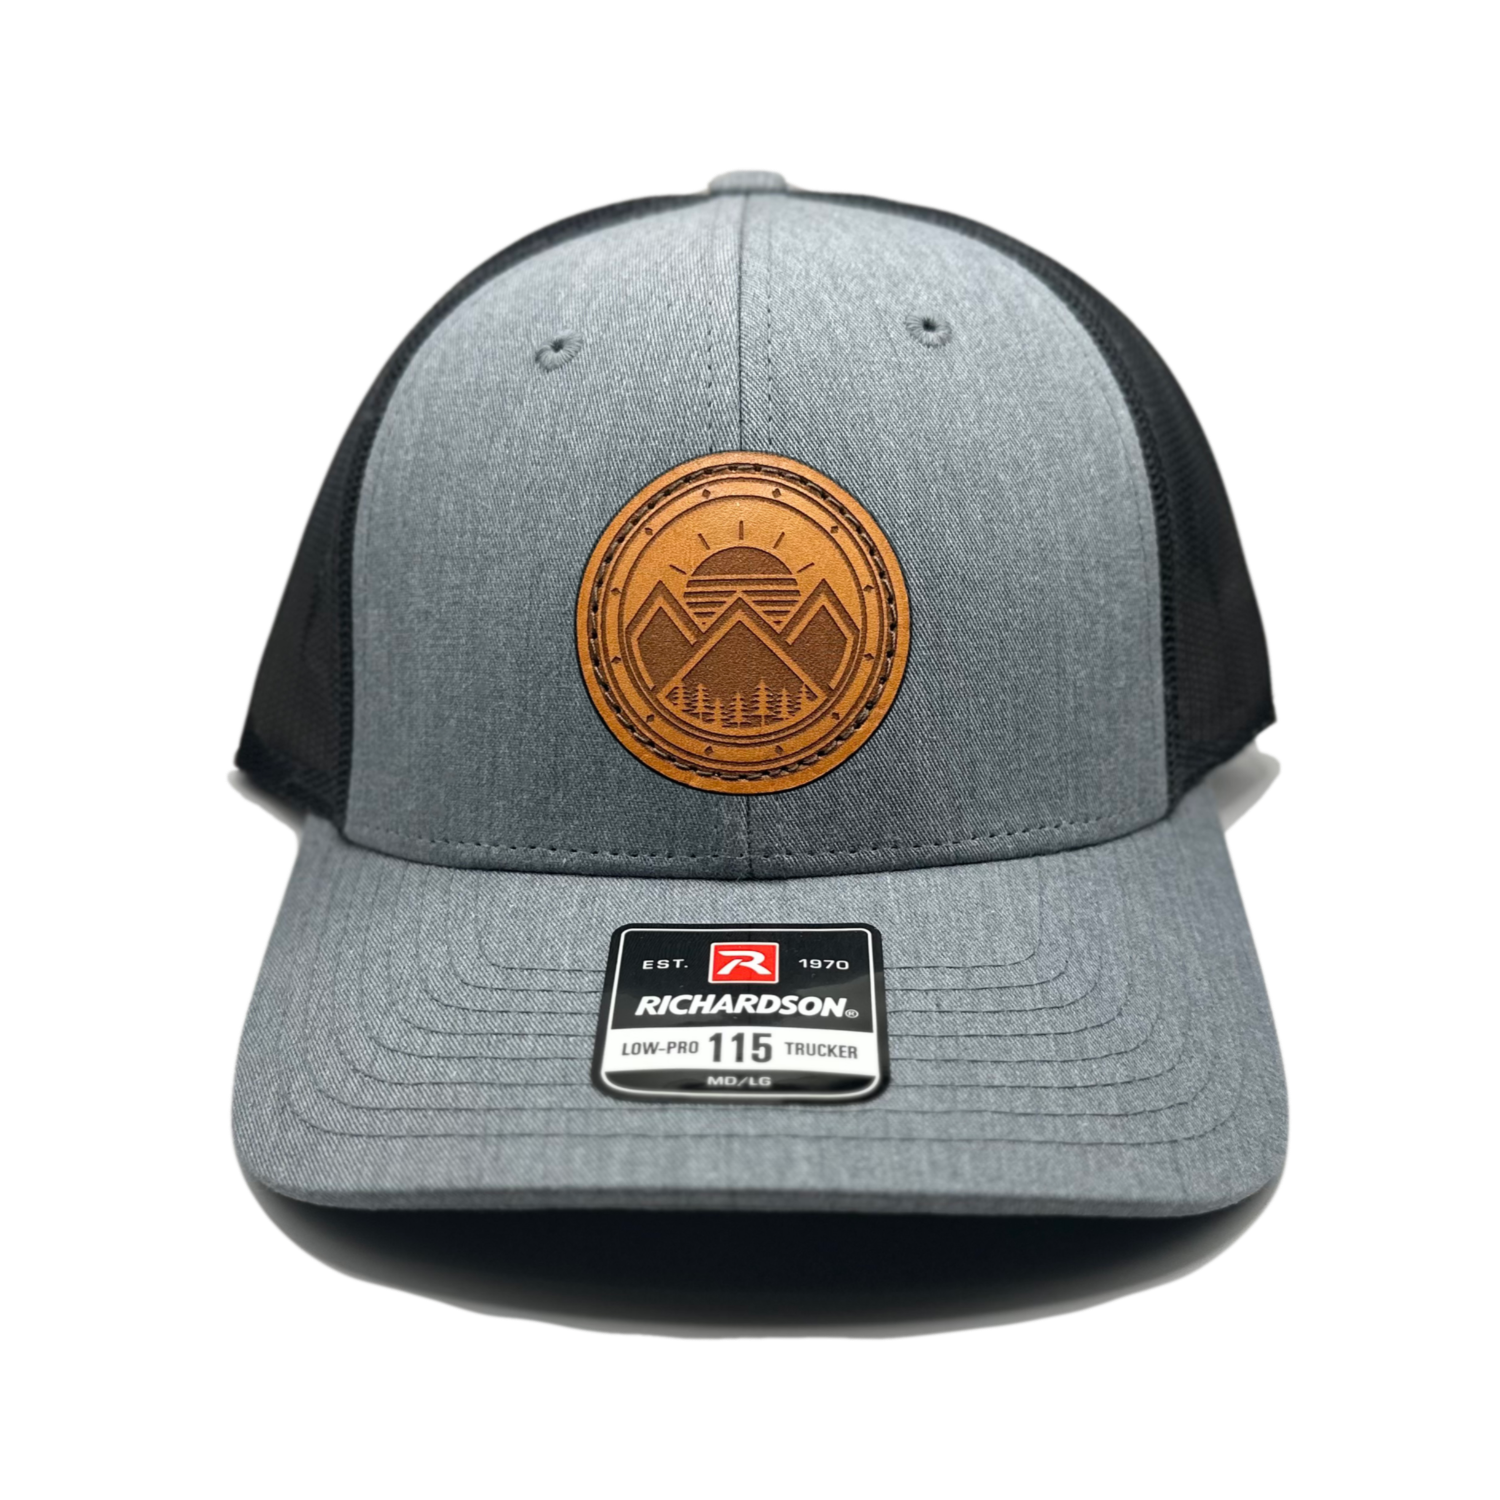 A trendy leather patch hat named Modern Mountains, boasting a unique design with three mountain peaks, a sunrise, pine trees, and a decorative border on a circular patch. Crafted and designed in the USA, this authentic leather patch is skillfully sewn onto a SnapBack adjustable hat. Offered in small and m/l sizes in the Richardson 115 style, as well as multiple colors in the Richardson 112. Inspired by the picturesque surroundings of our Colorado mountain location, this hat is perfect for fashion-forward